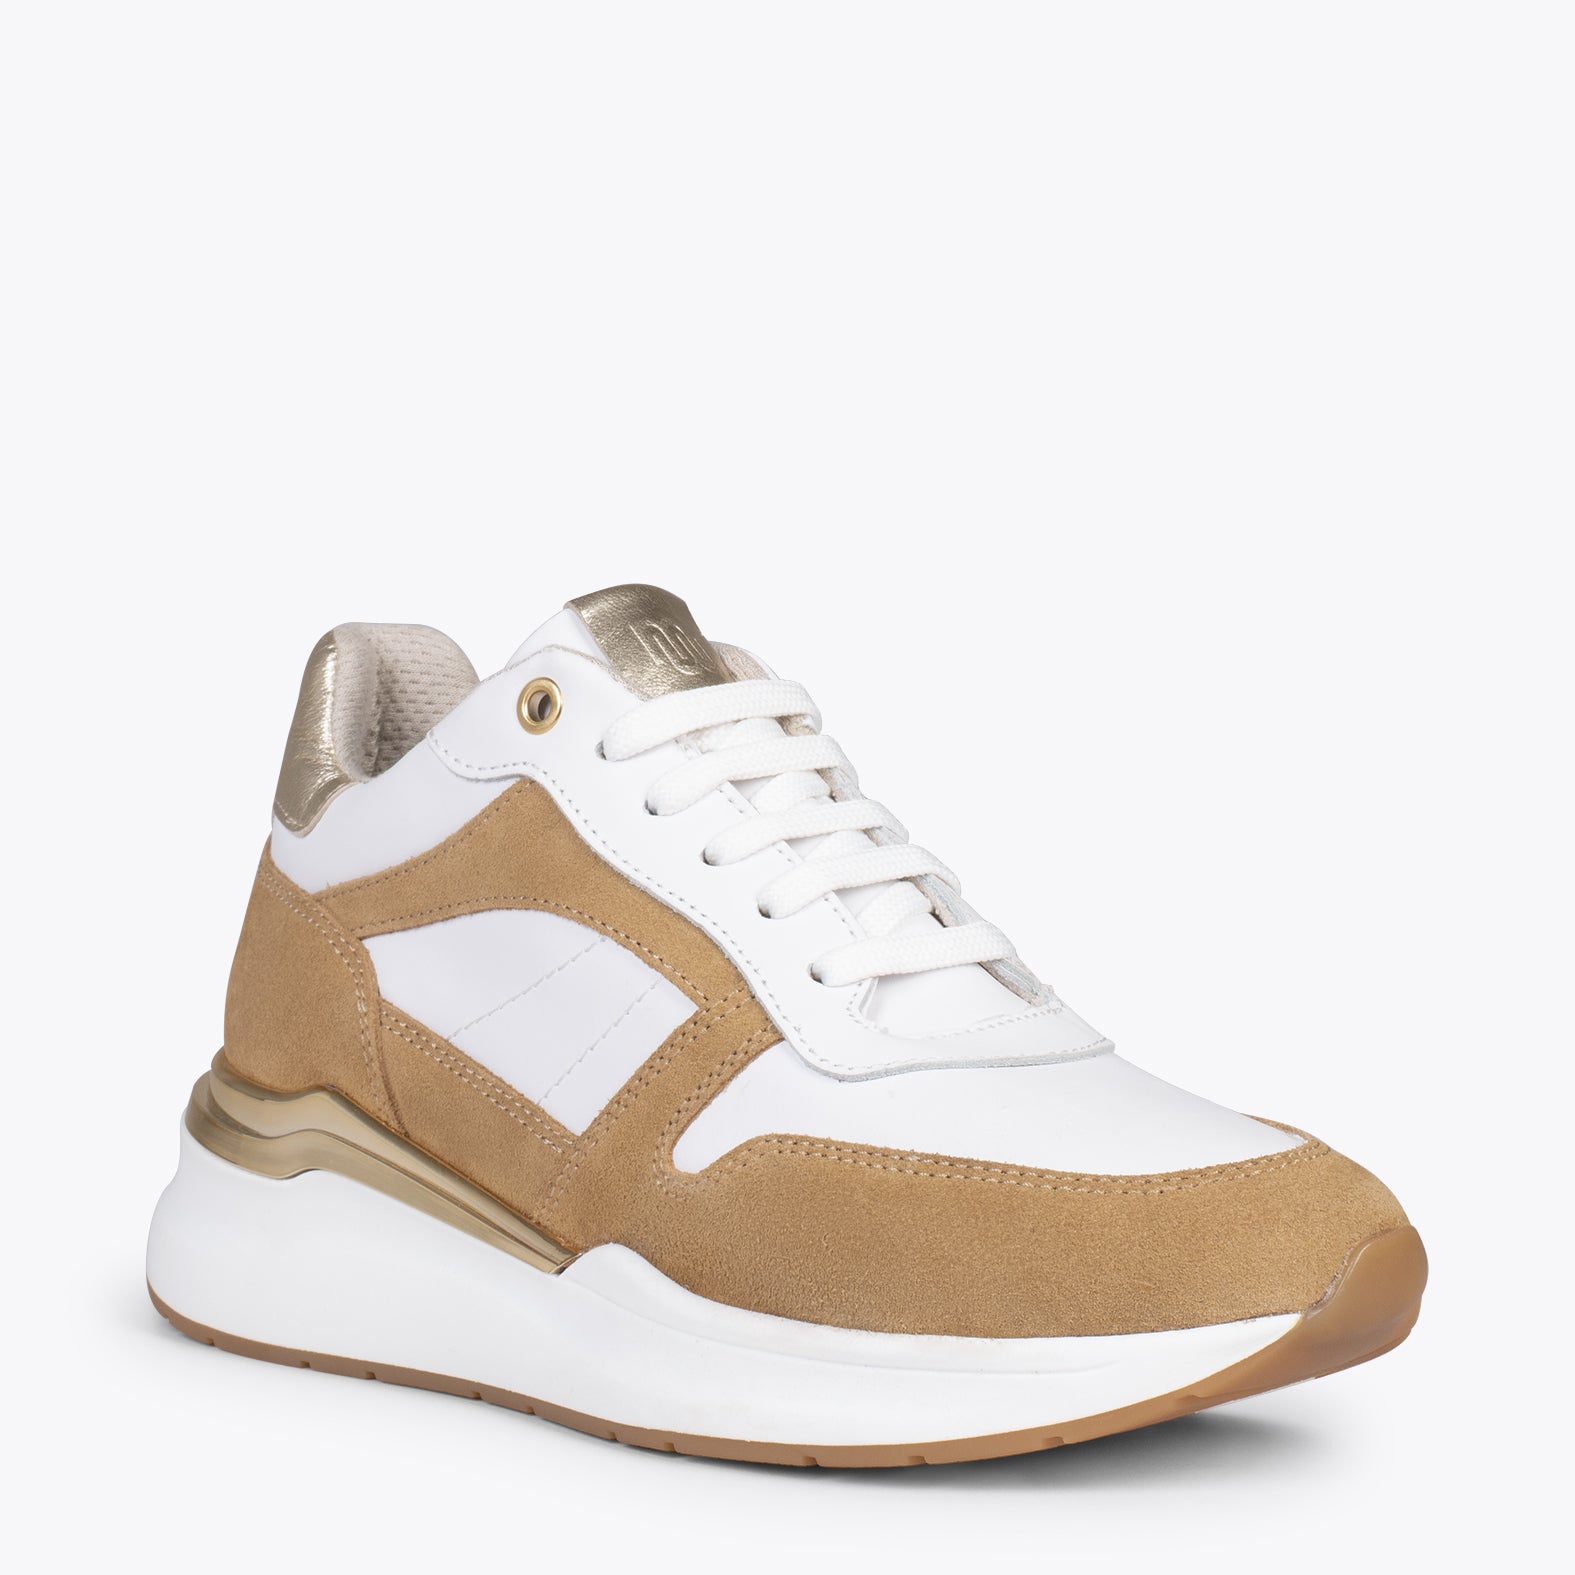 FREEDOM – BEIGE sneakers with removable insole